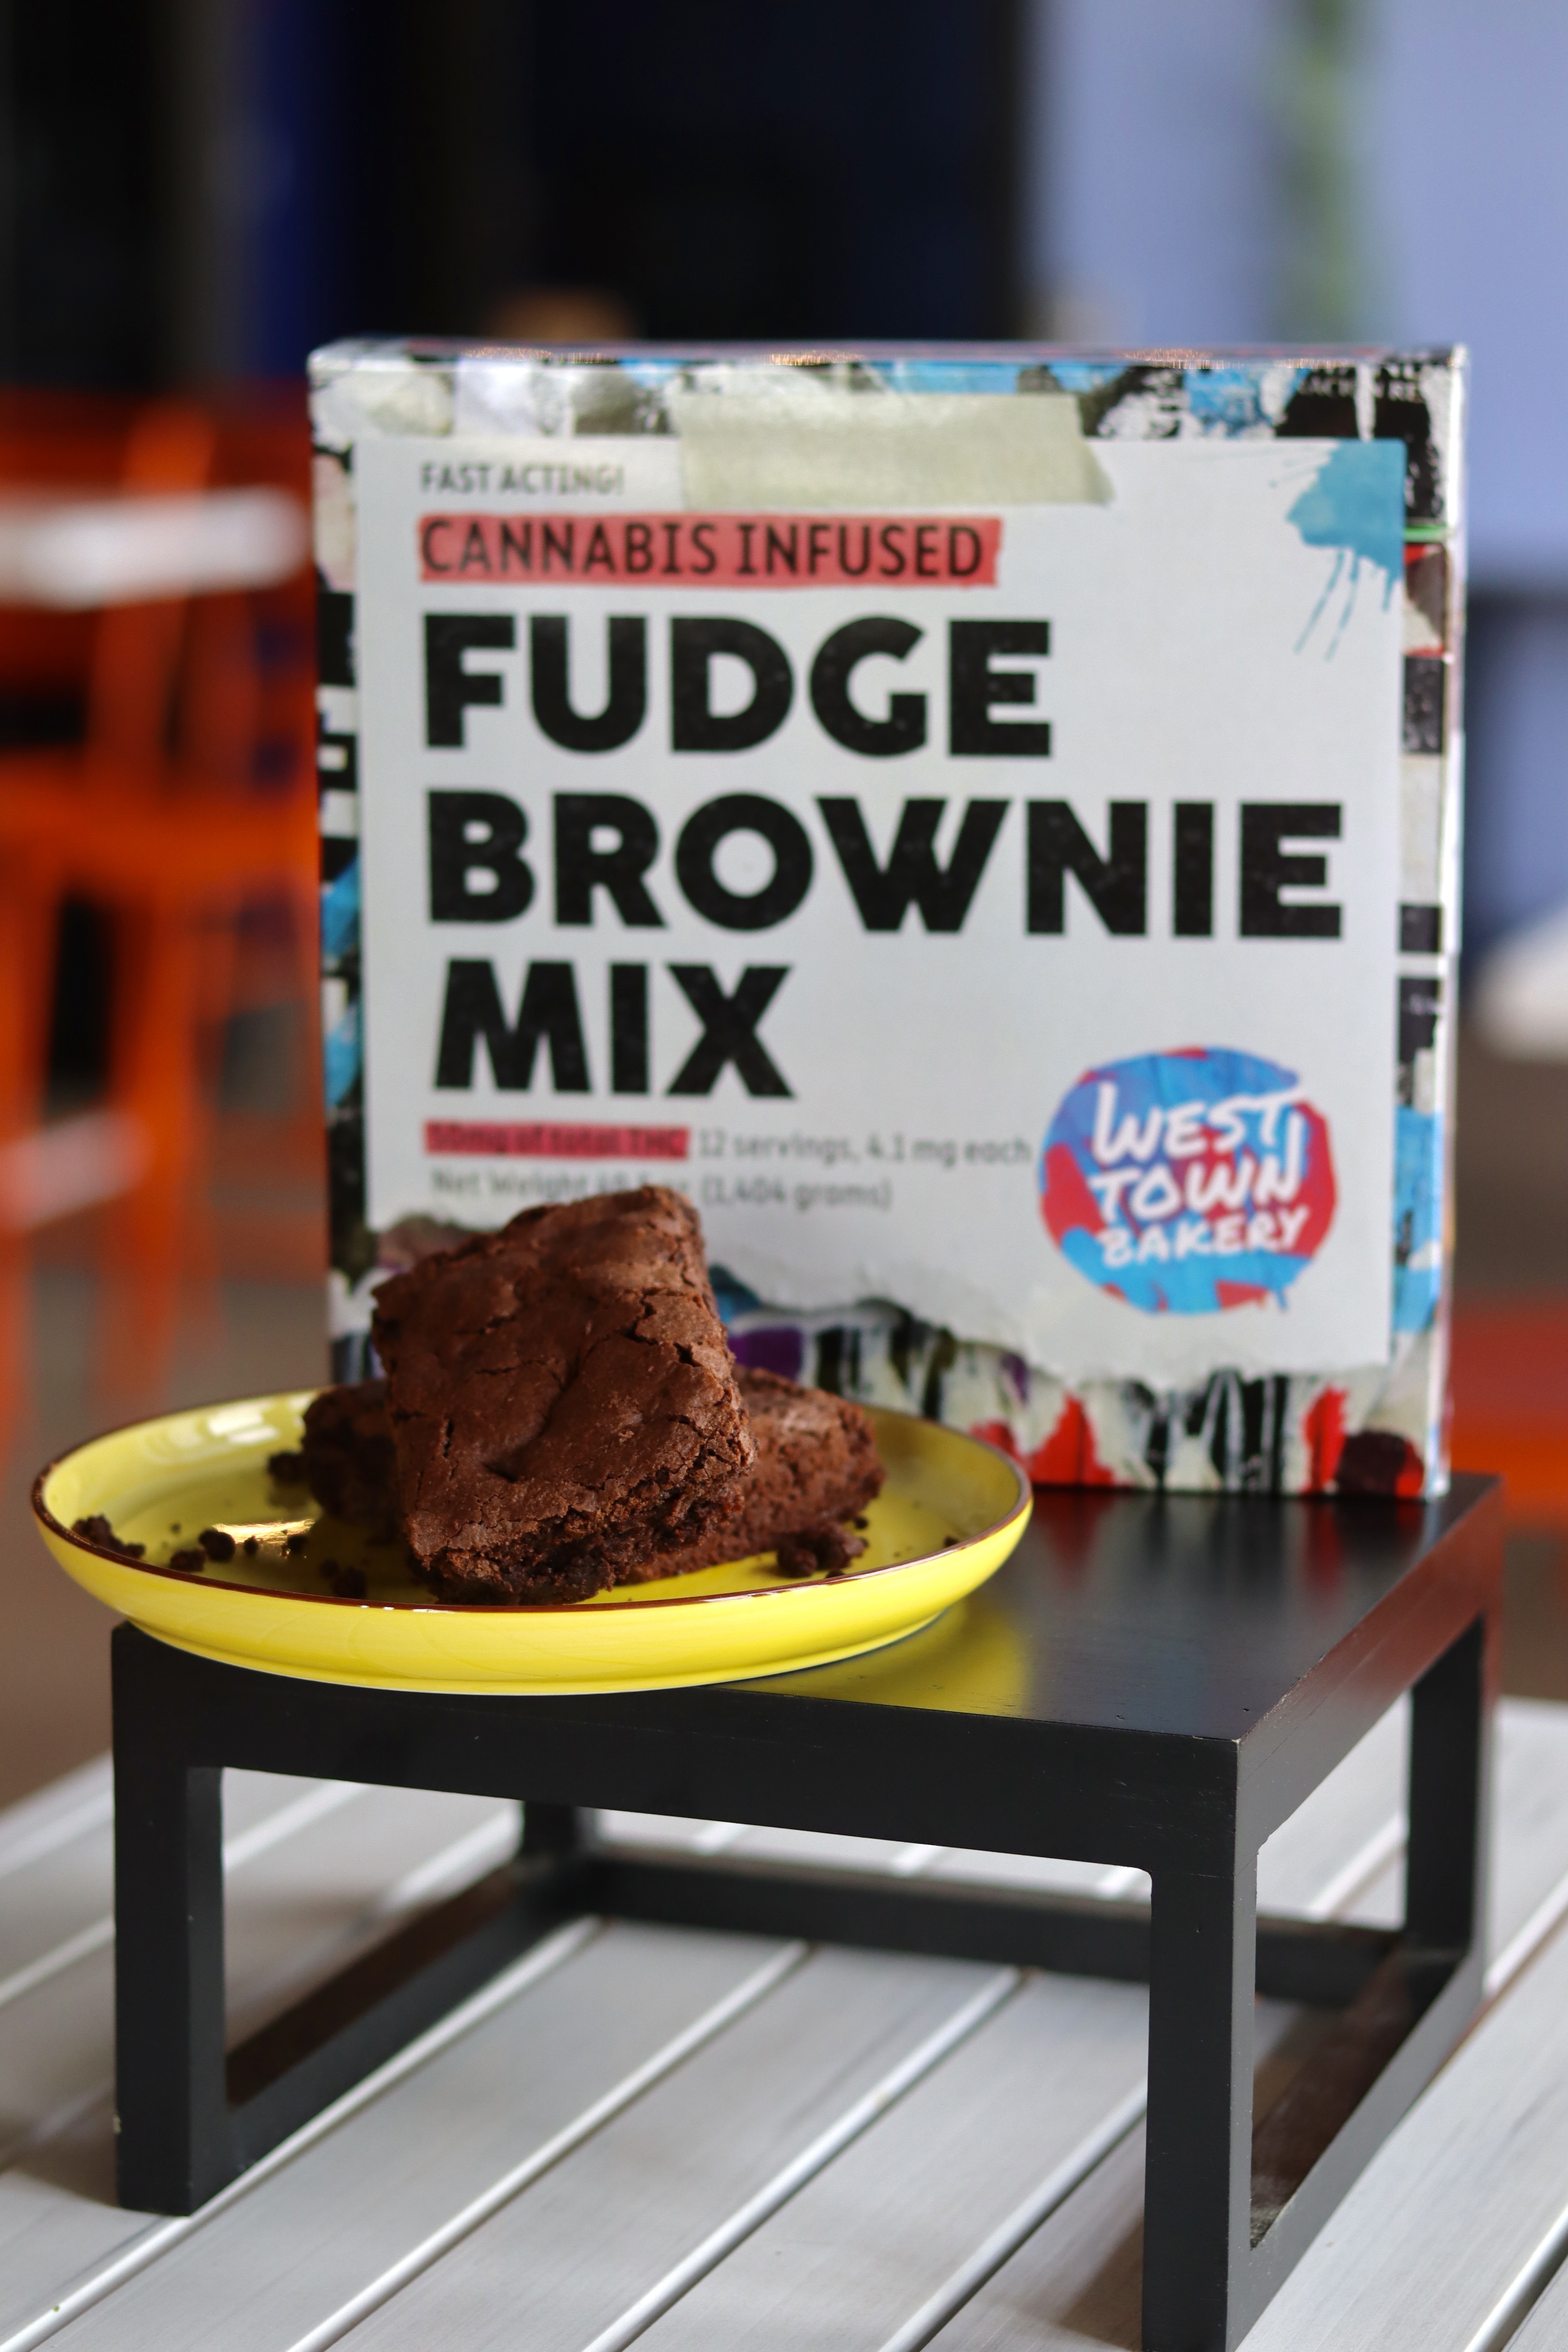 A box of cake mix and plate of brownies.